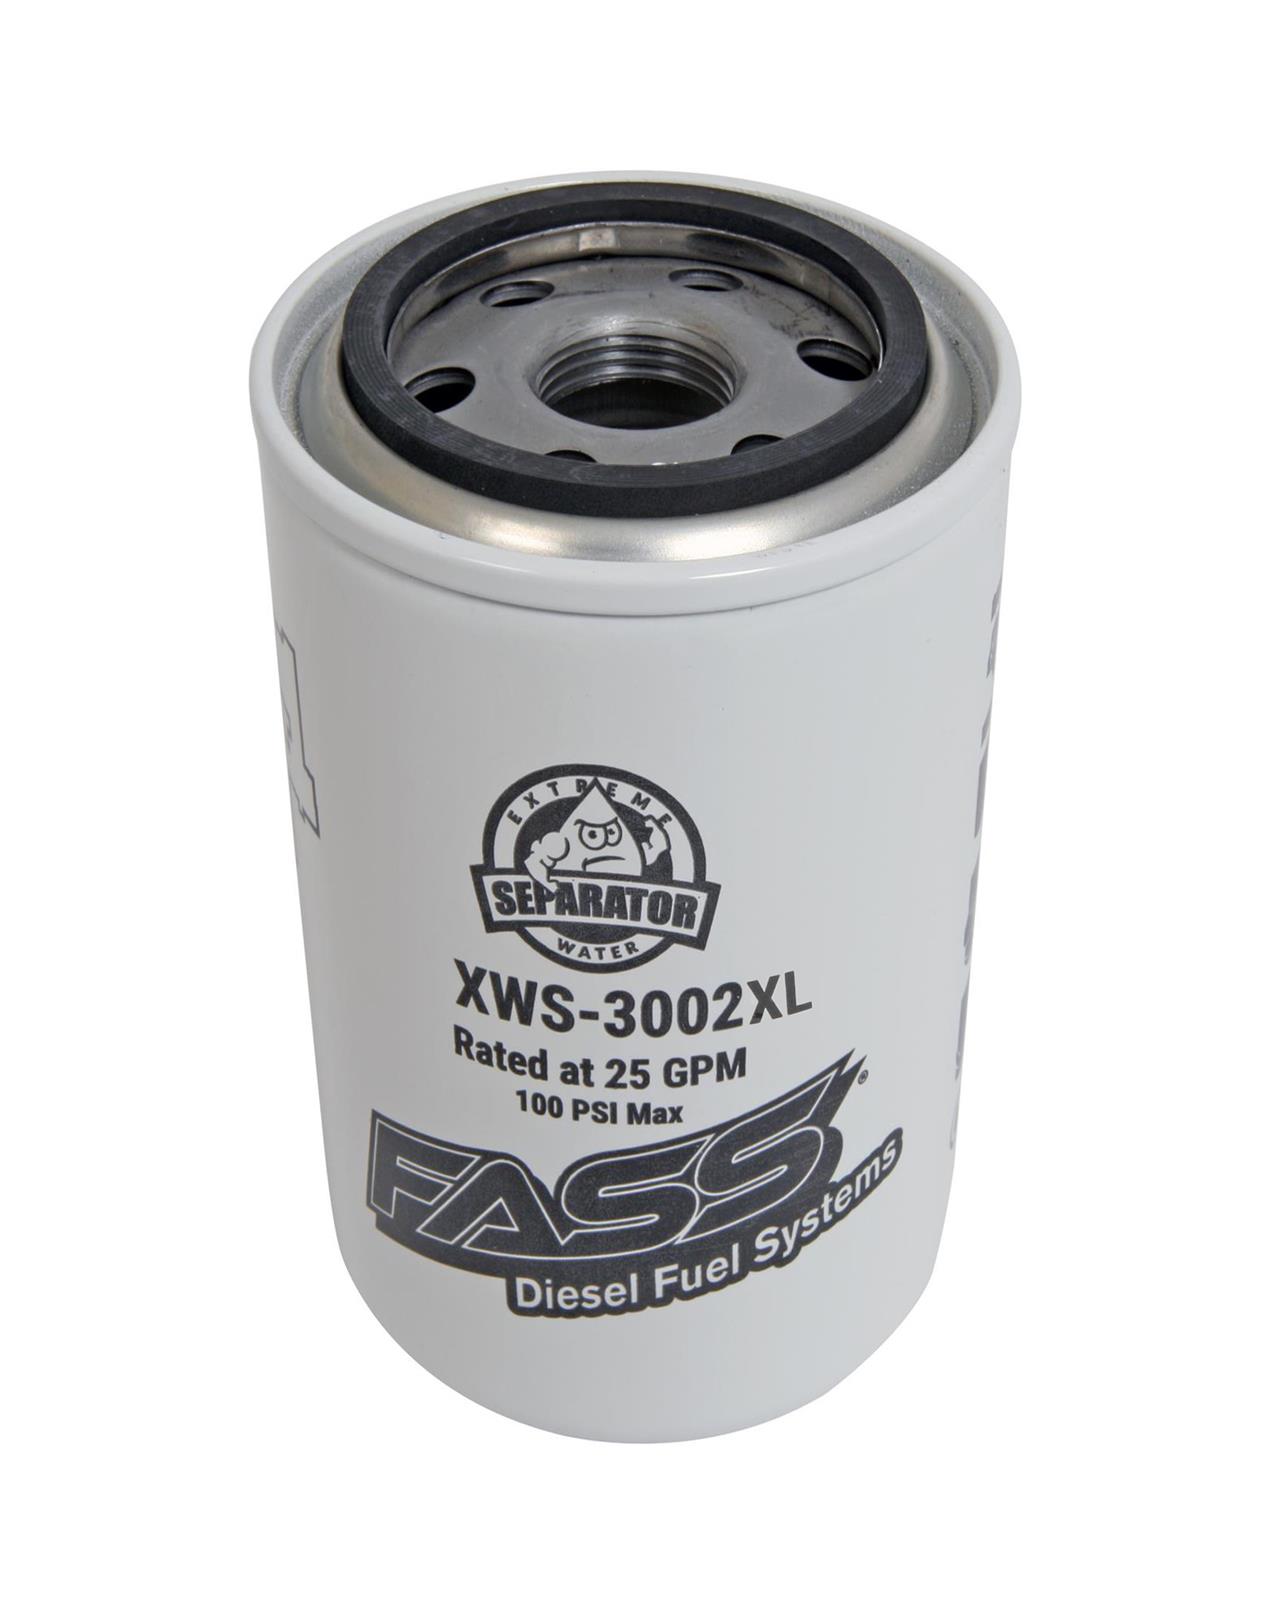 FASS Fuel Systems XWS-3002XL FASS Fuel Systems Replacement Fuel Filters